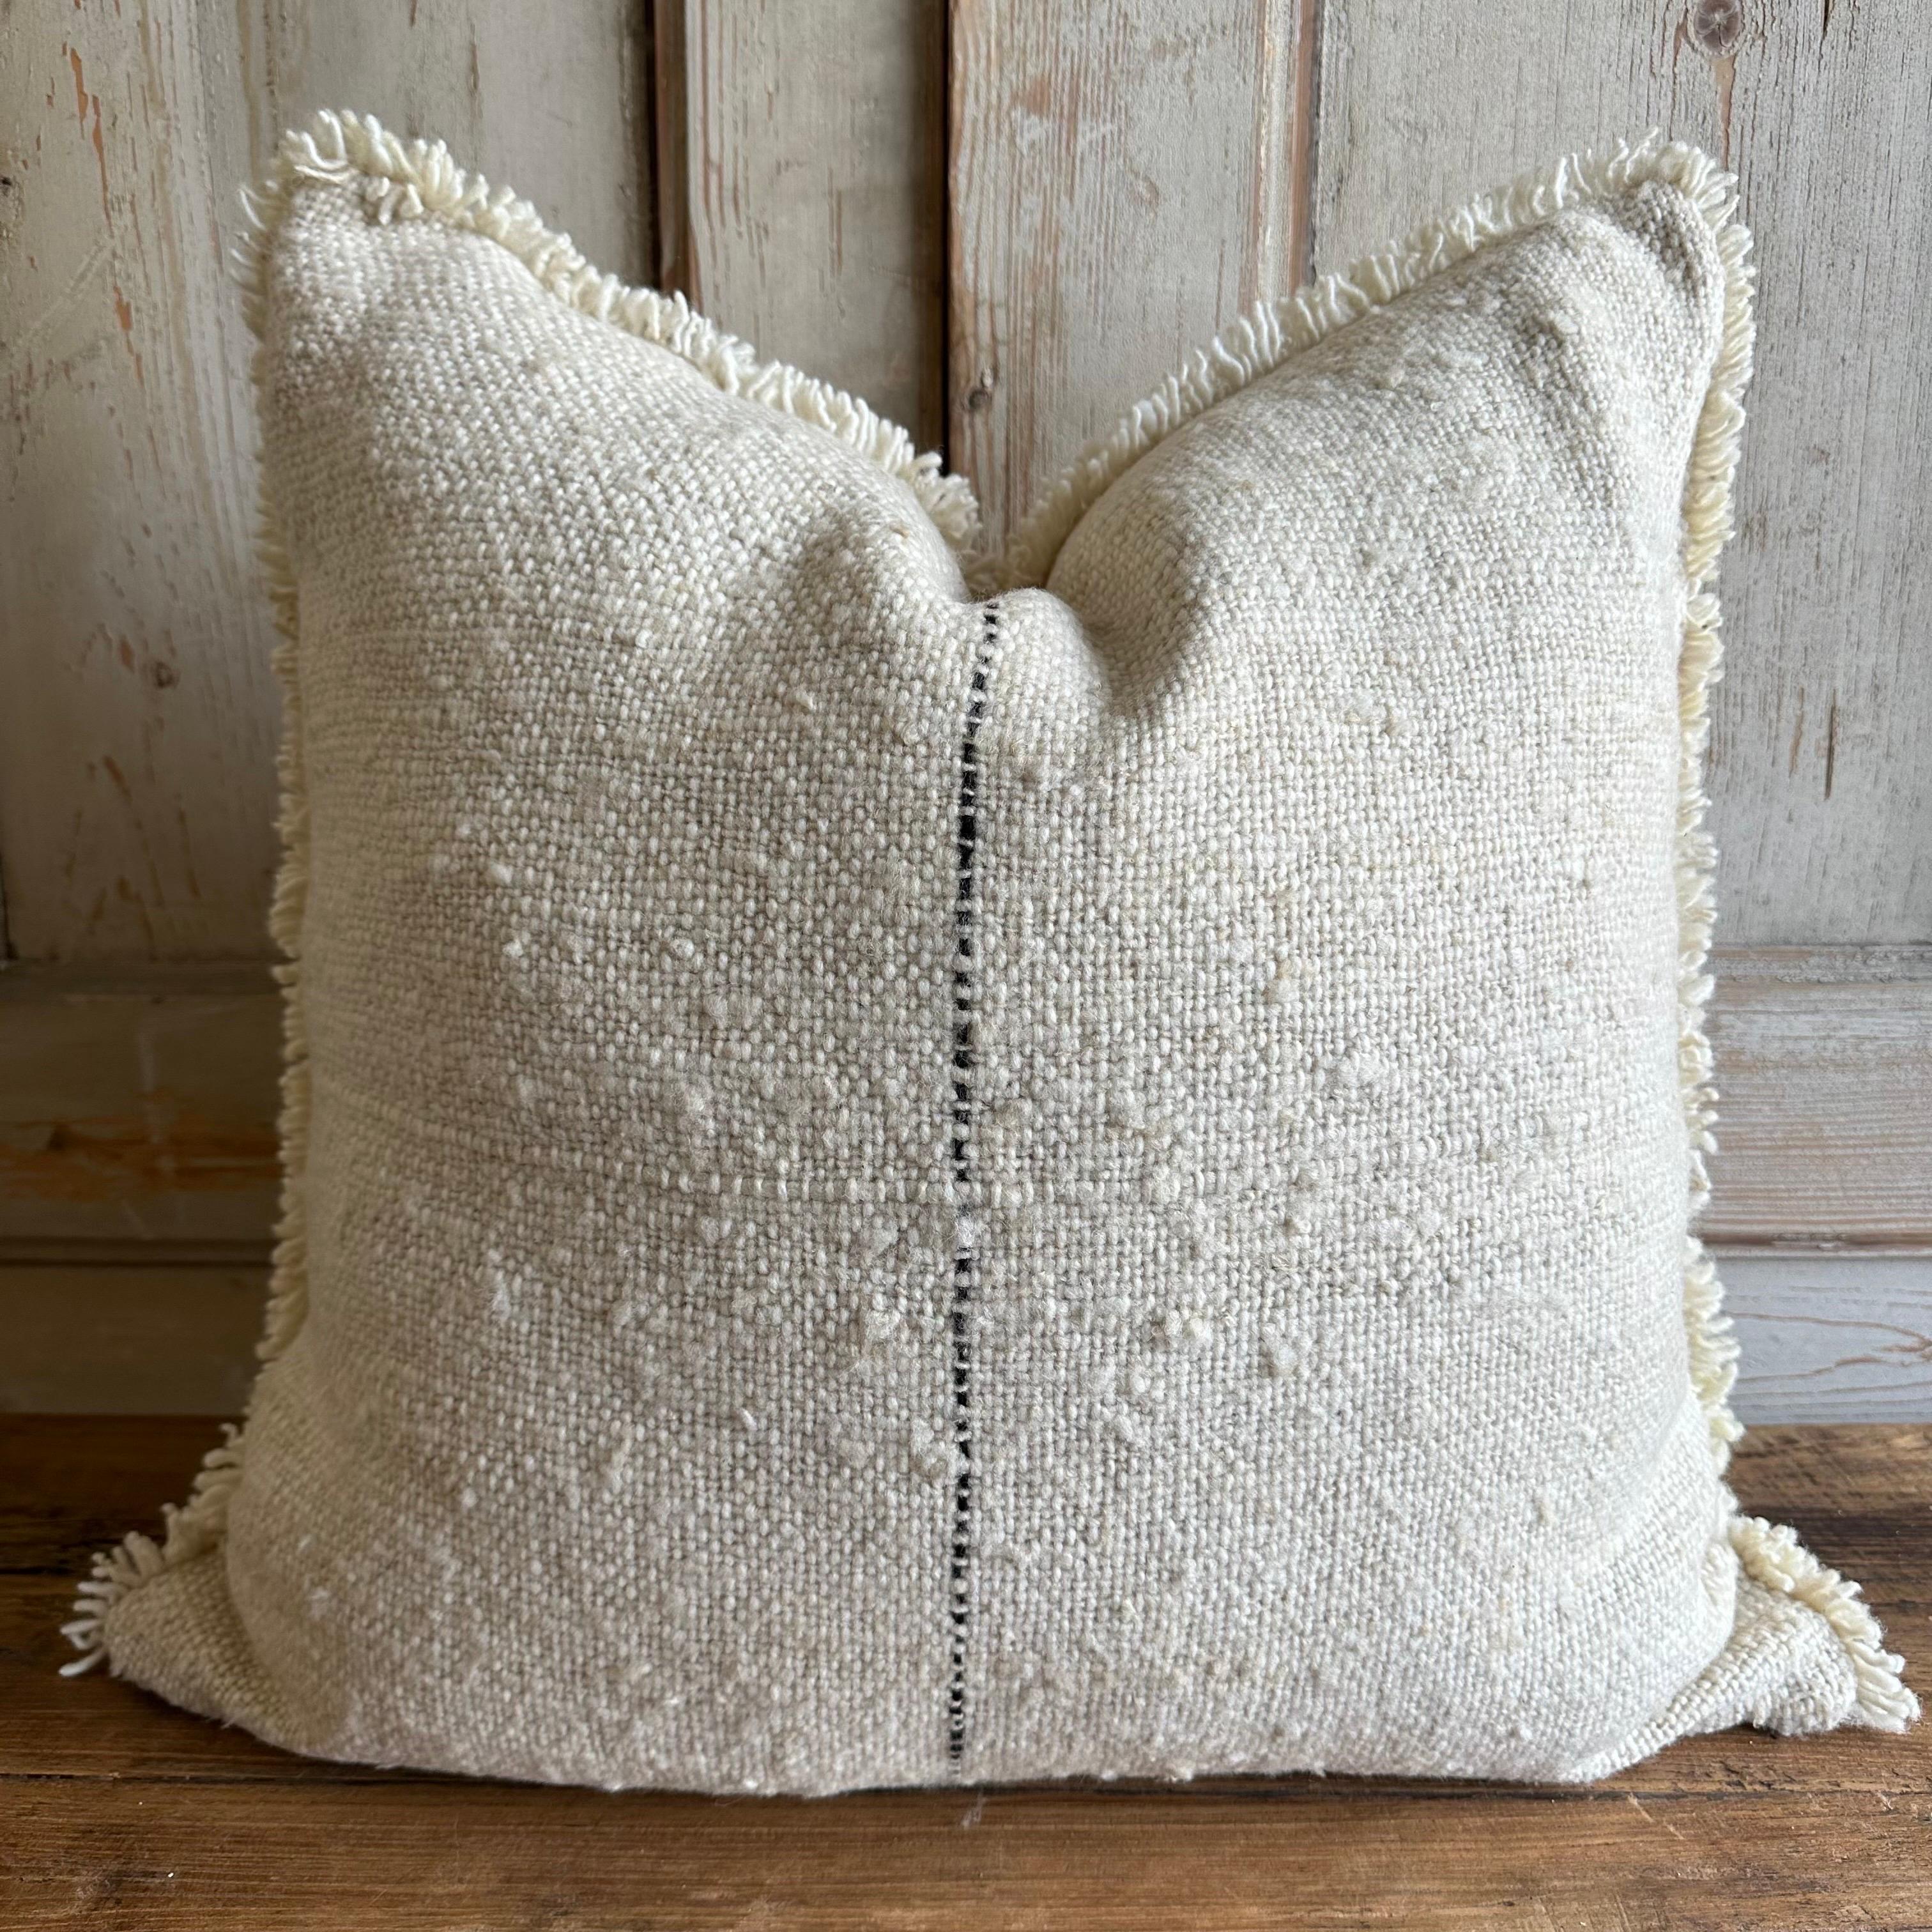 KARU 24”x24”
Organic Wool Handmade Pillow
All of our products are commissioned and handmade by the craftswomen of Chiloé. The textiles are made with 100% wool from ’Chilota’ sheep, that are born and raised on the island.?The process by which these